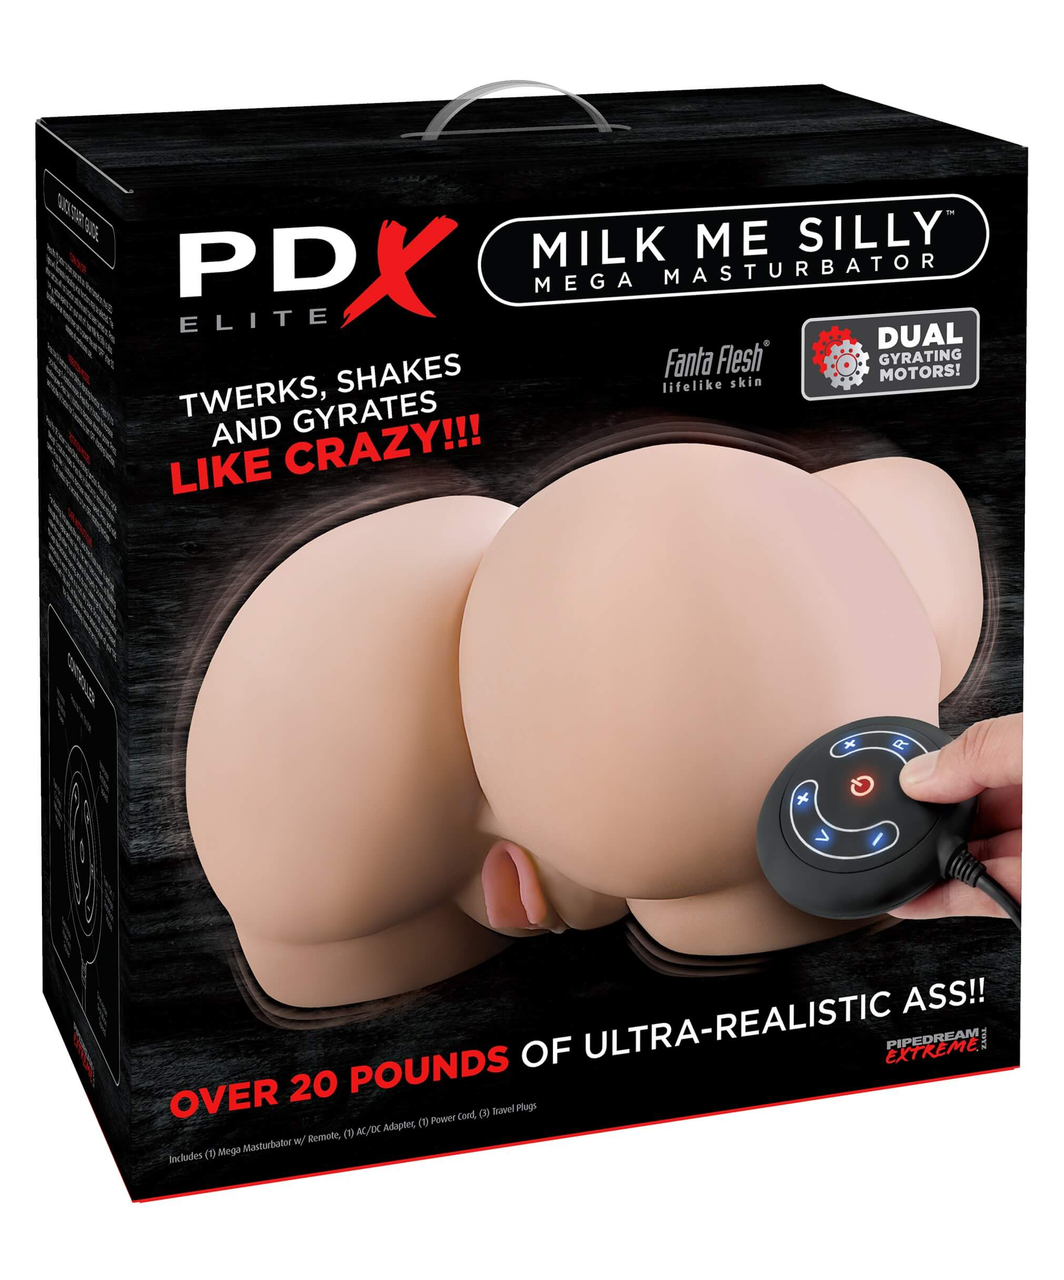 Pipedream Extreme PDX Elite Milk Me Silly Dual Gyring Motors